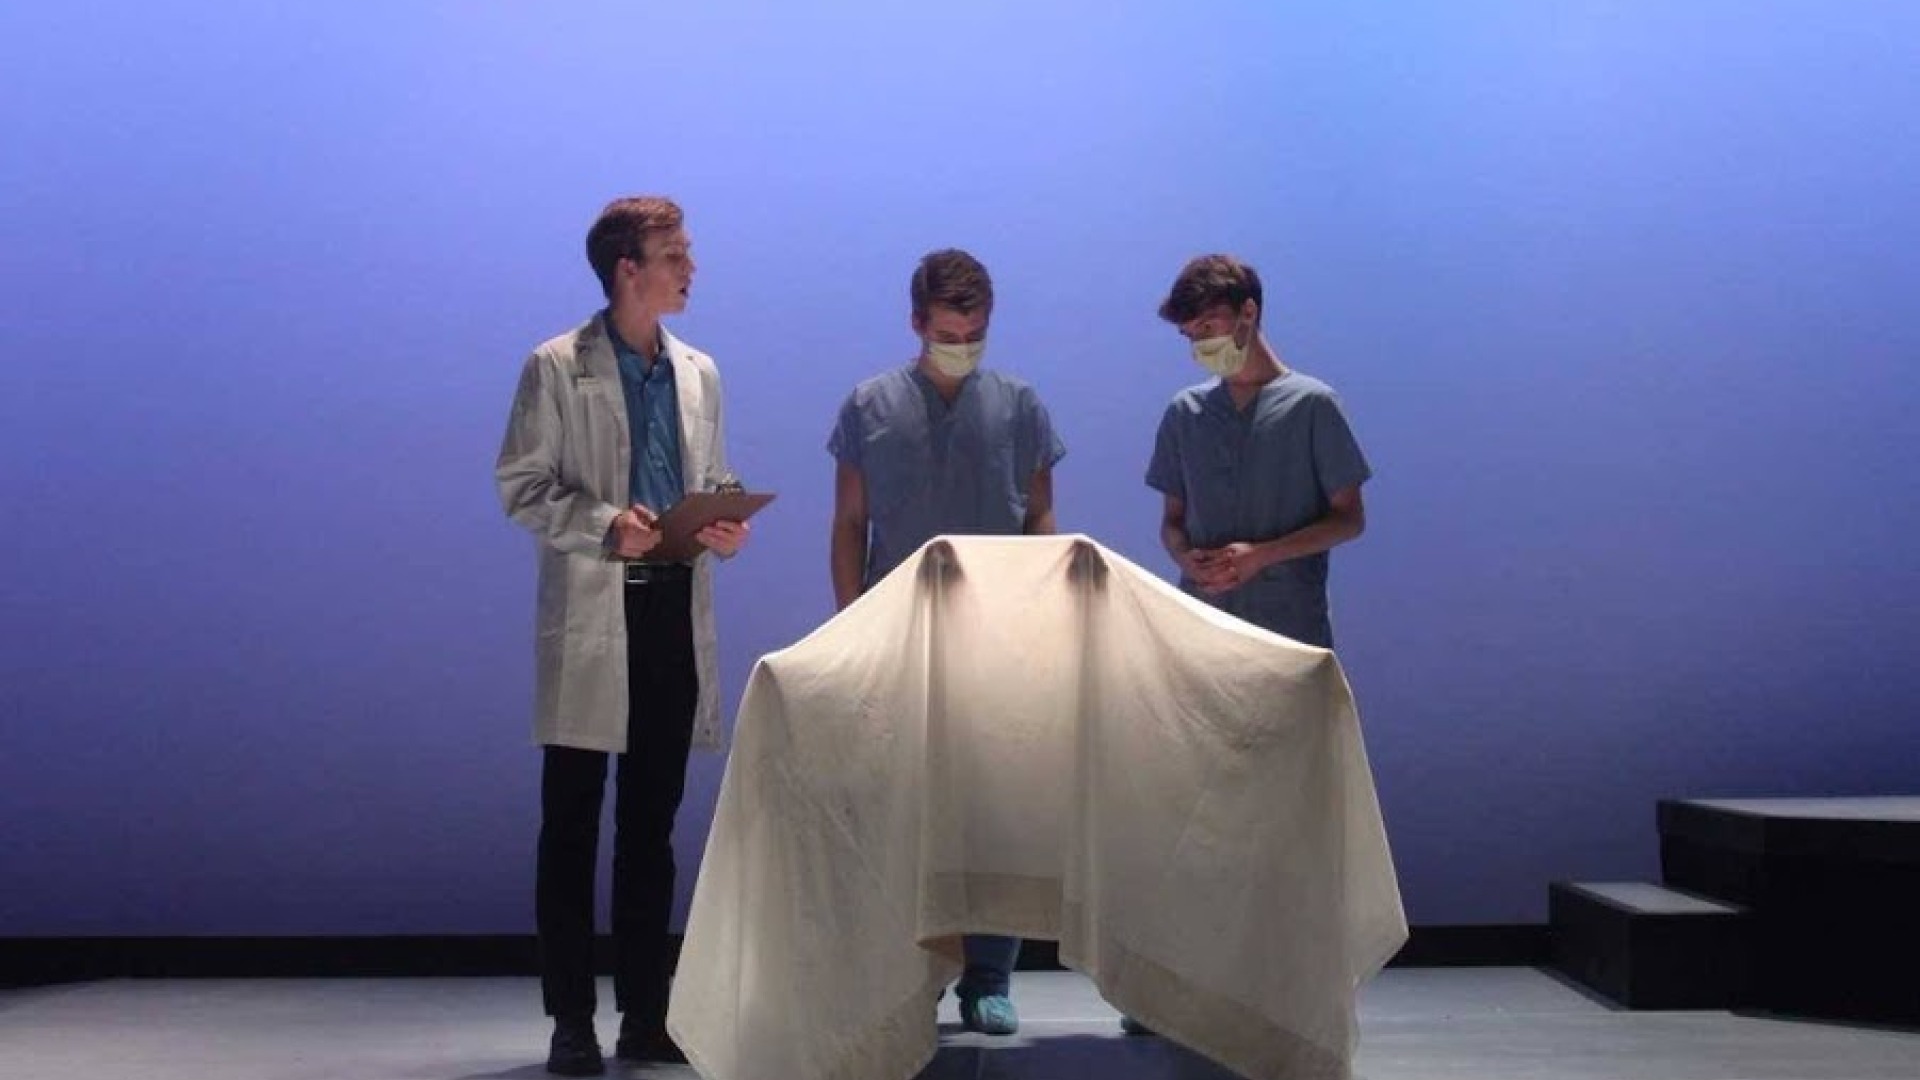 Students playing as doctors in morgue in play